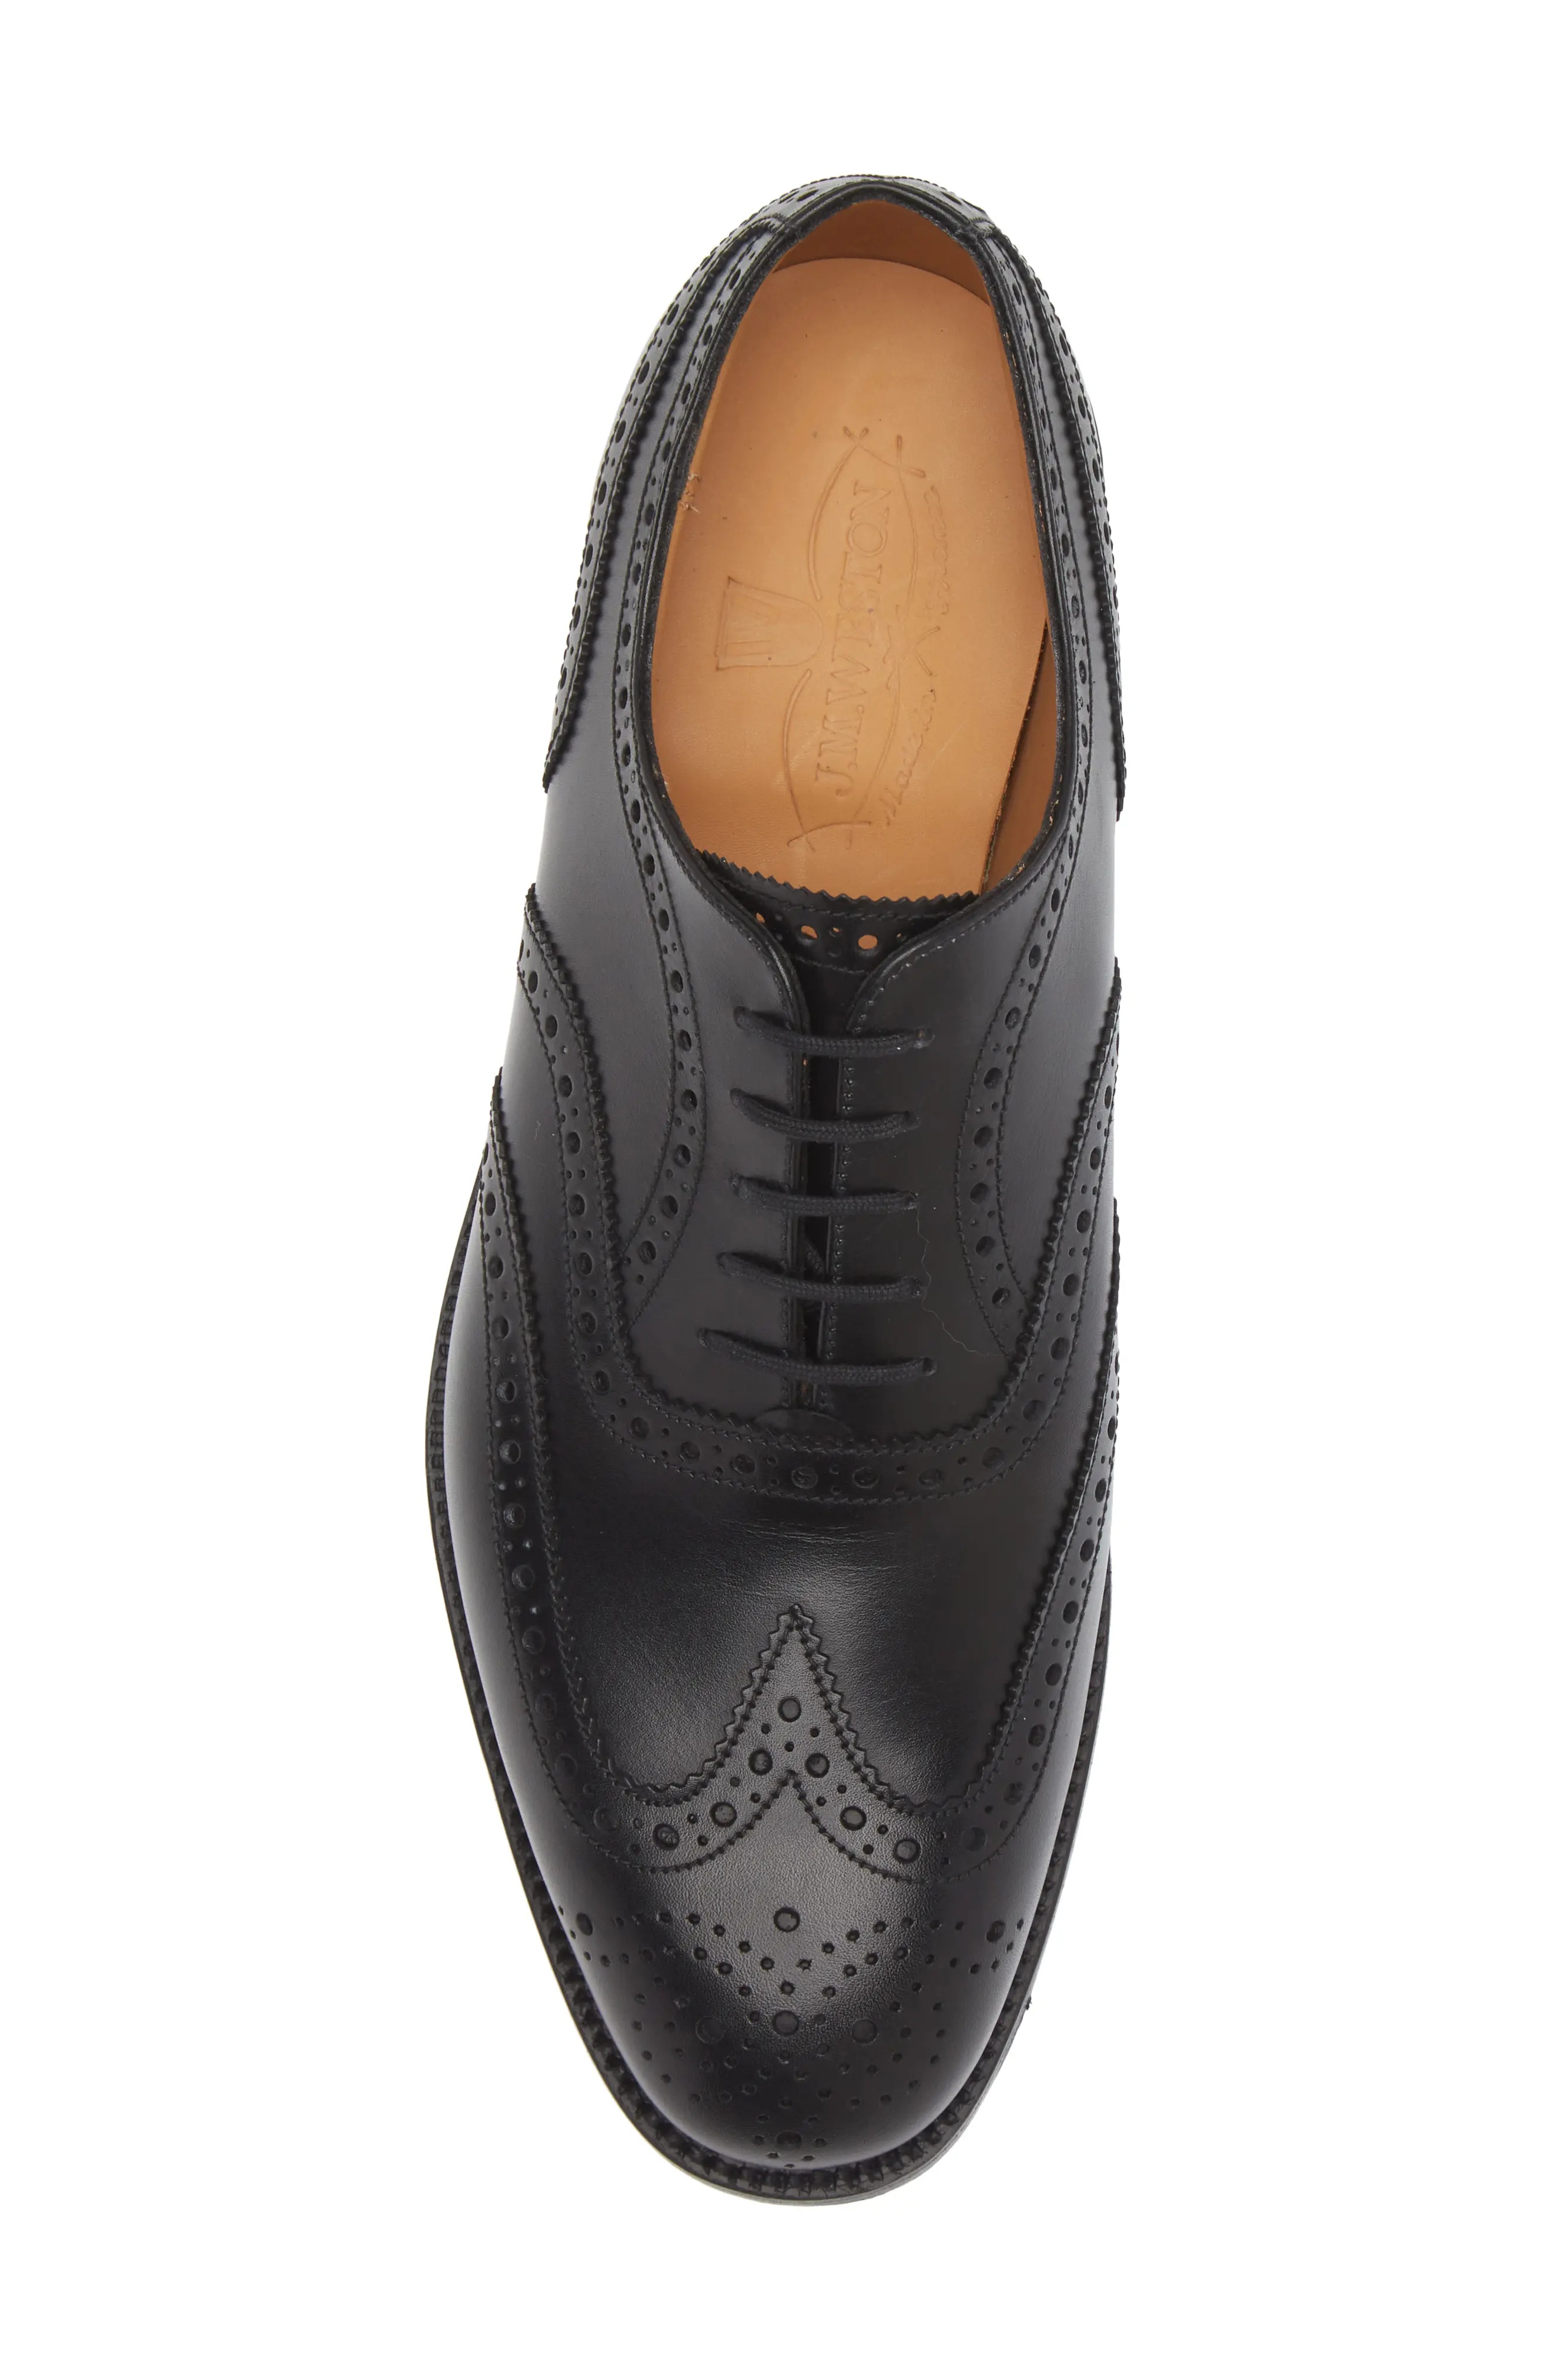 376 Reedition Archive Brogue Oxford - 5